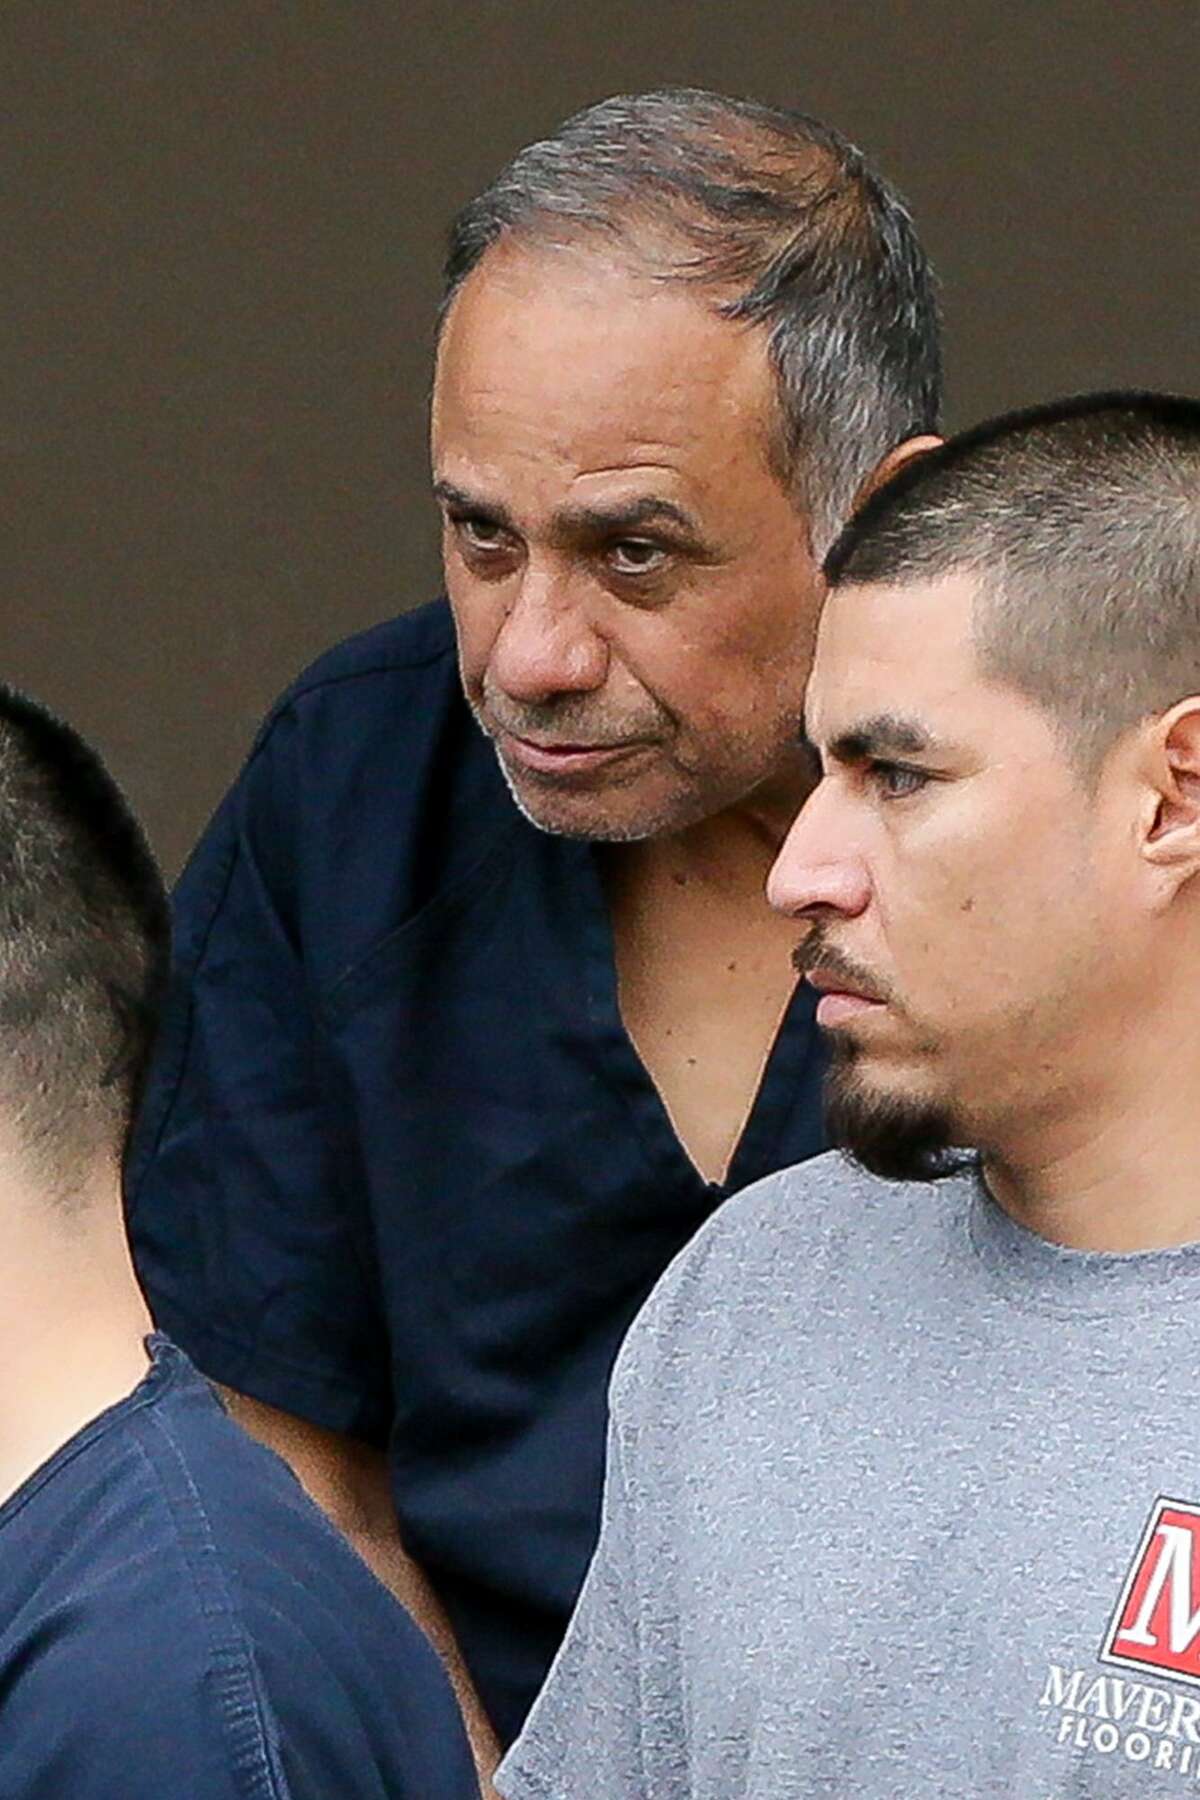 Juan Manuel “Mono” Muñoz Luevano, top, exits the federal courthouse after a March hearing after being extradited from Spain to Texas by the United States on drug charges. Muñoz, the owner of a chain of gas stations in northern Mexico, was indicted in San Antonio in 2016 with four counts related to the import and distribution of cocaine, a money laundering conspiracy count and conspiracy to possess a firearm during drug trafficking.